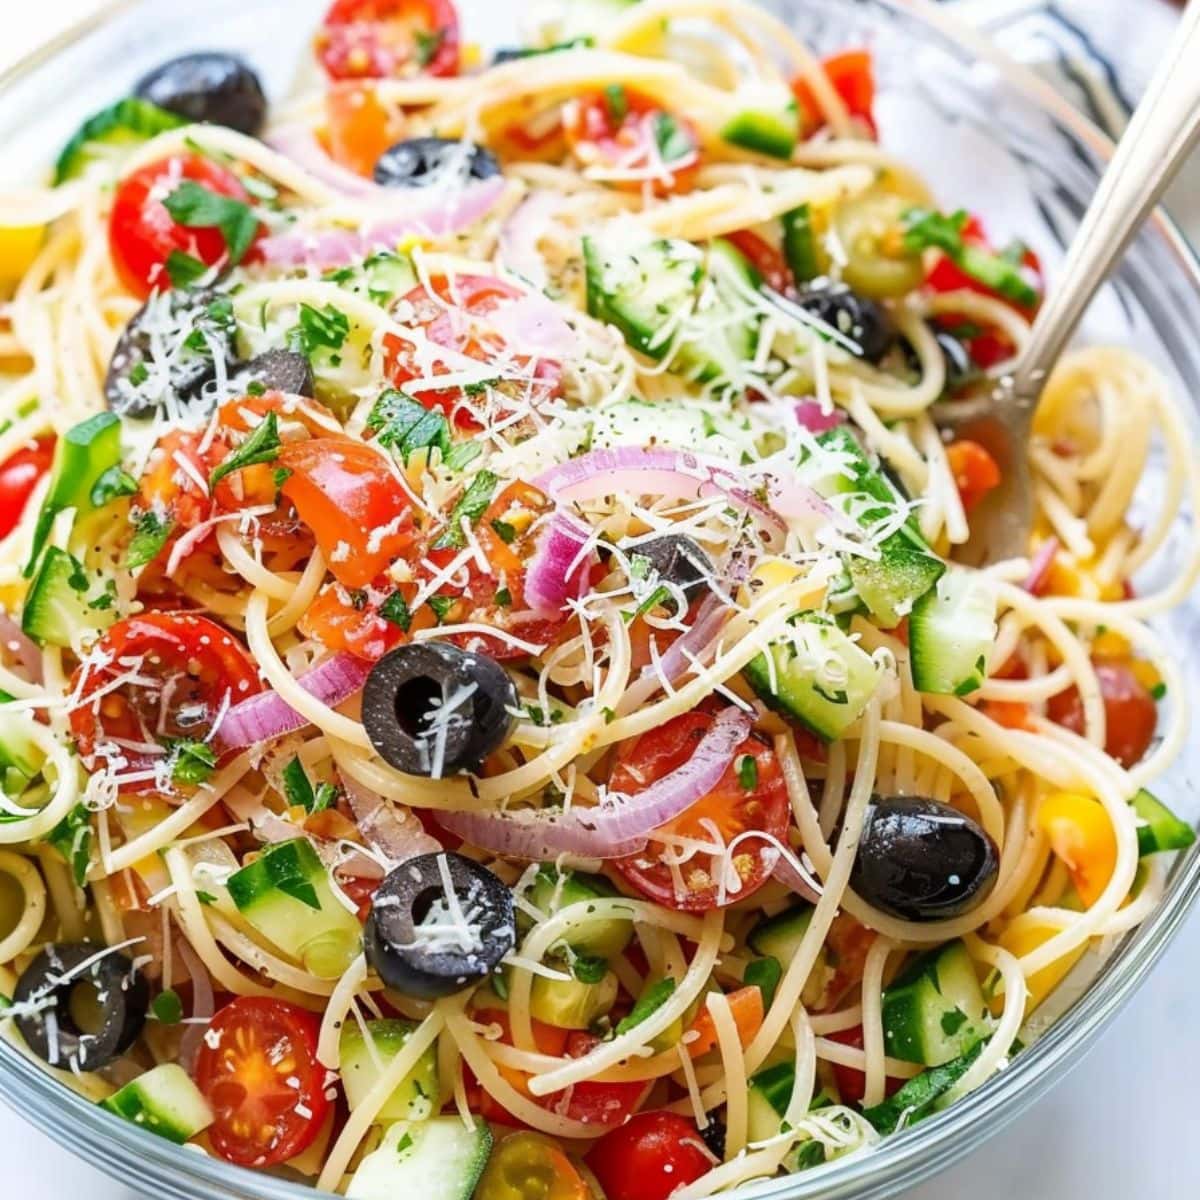 Italian spaghetti pasta tossed in a large glass salad bowl. 